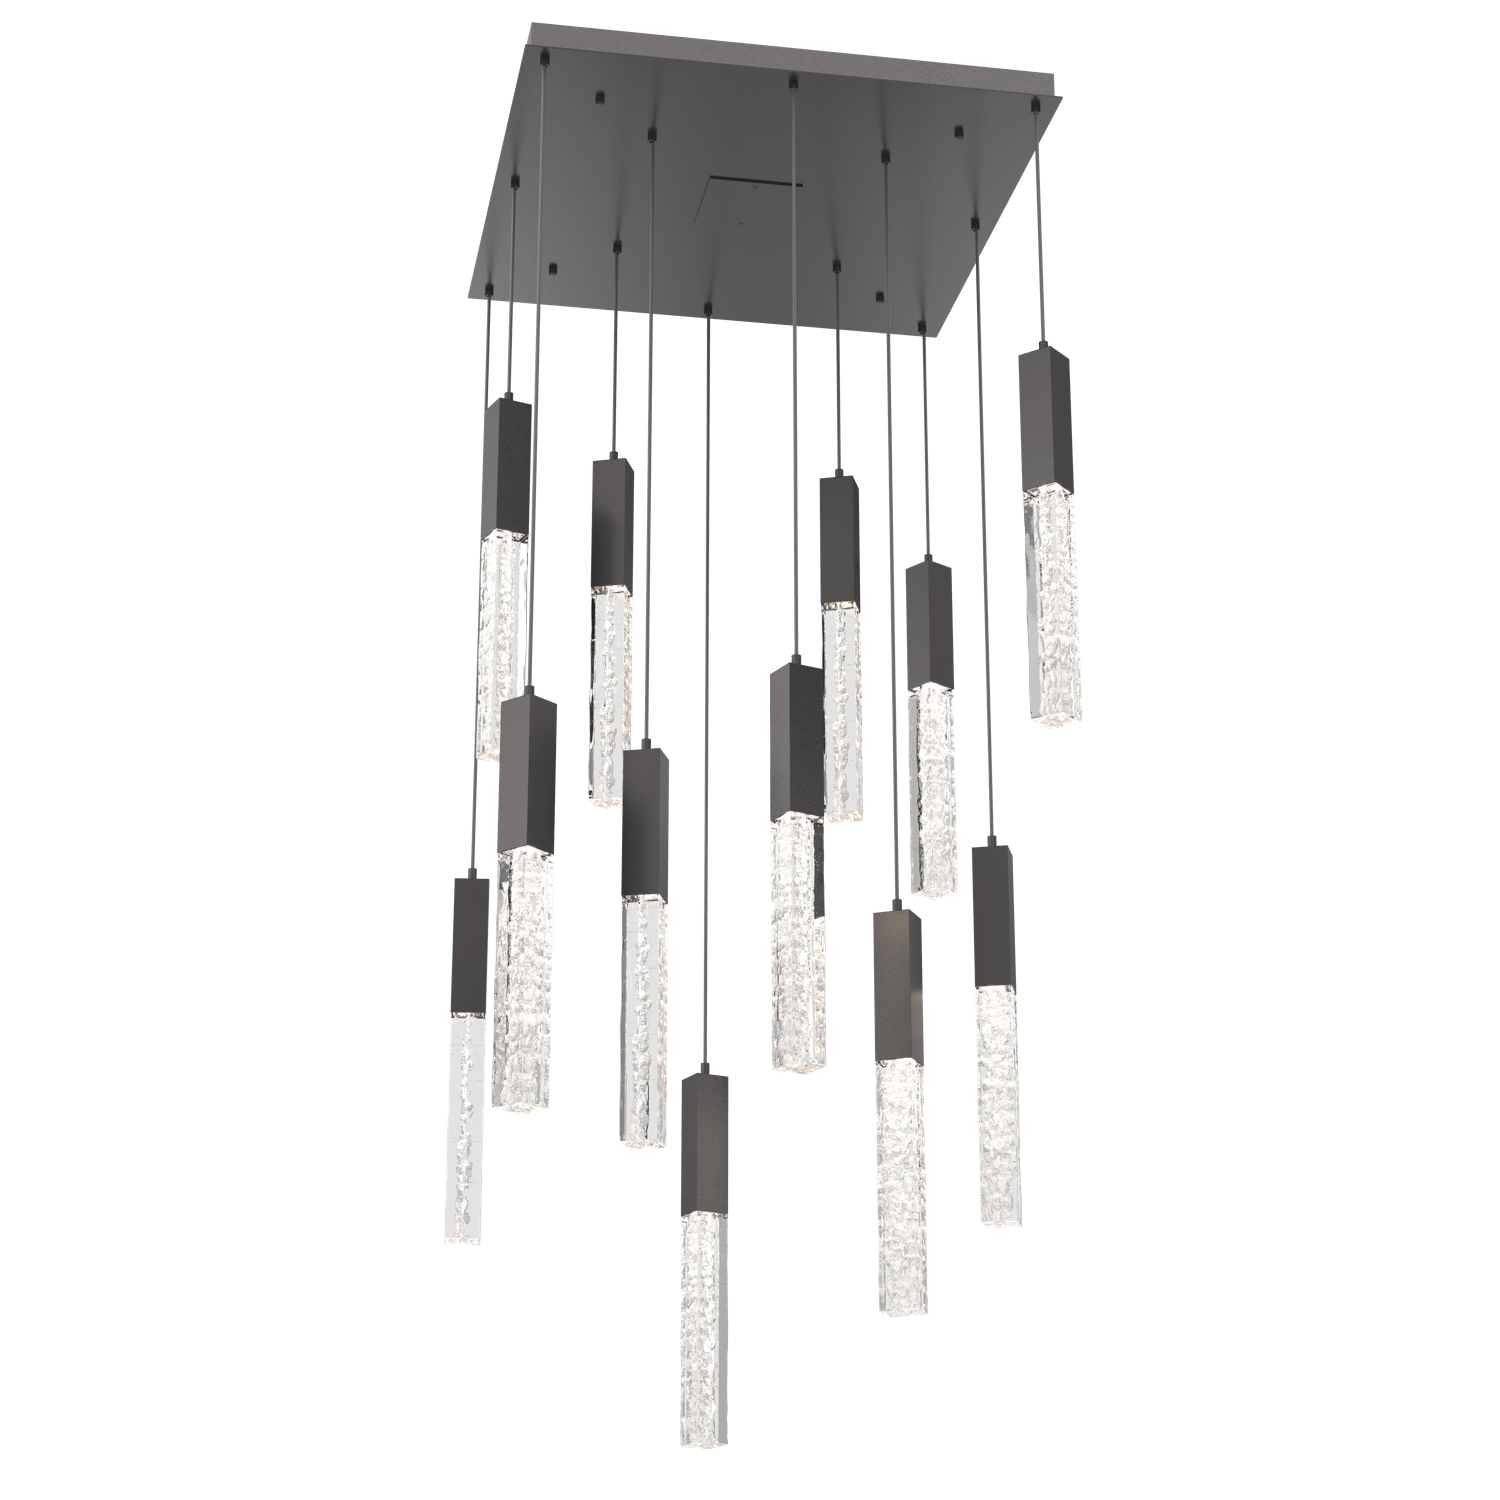 CHB0060-12-GP-GC-Hammerton-Studio-Axis-12-Light-Pendant-Chandelier-with-Graphite-finish-and-clear-cast-glass-and-LED-lamping